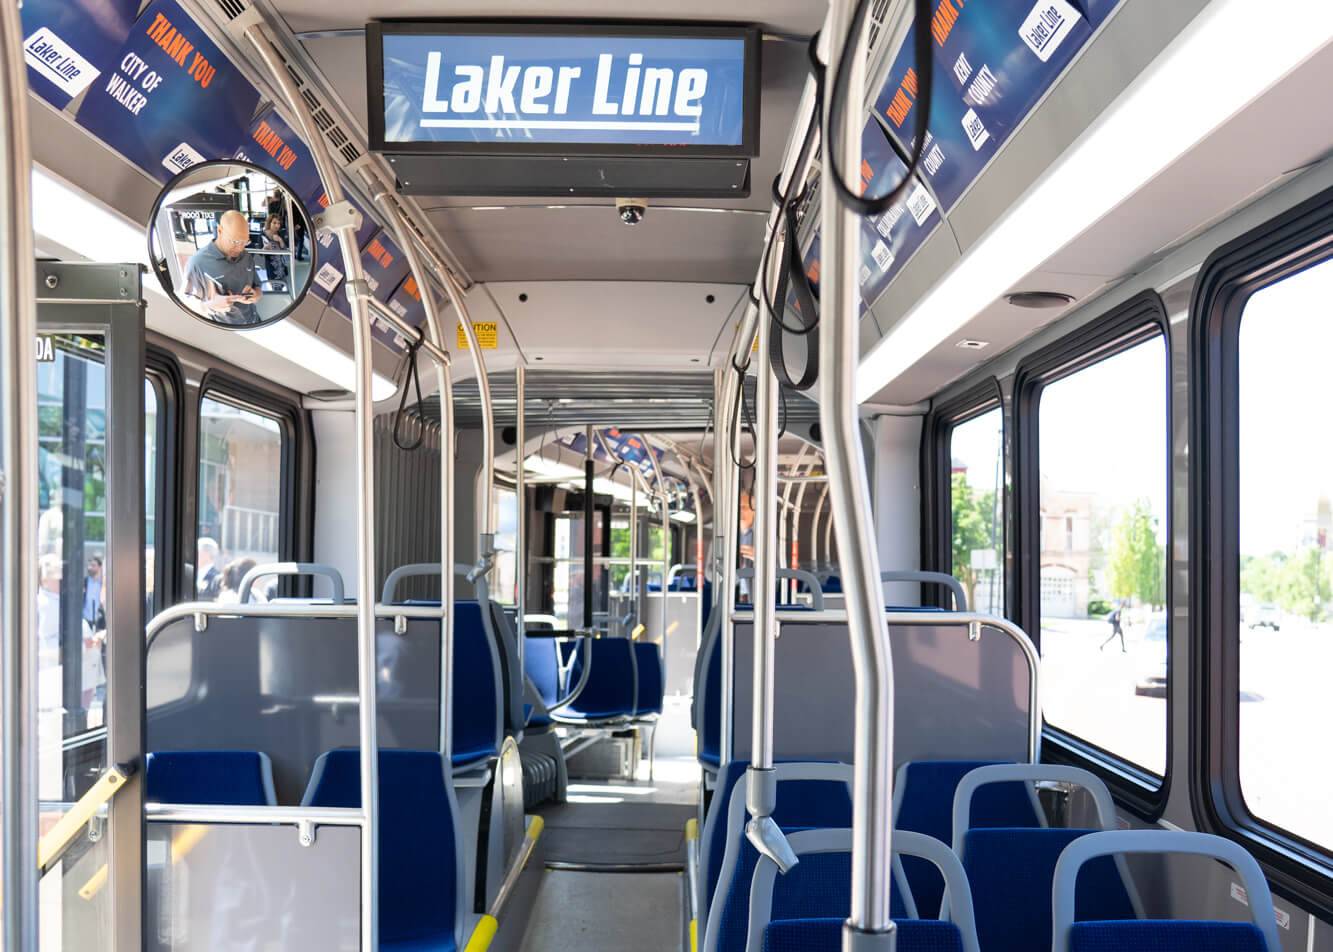 The interior of the Laker Line bus.